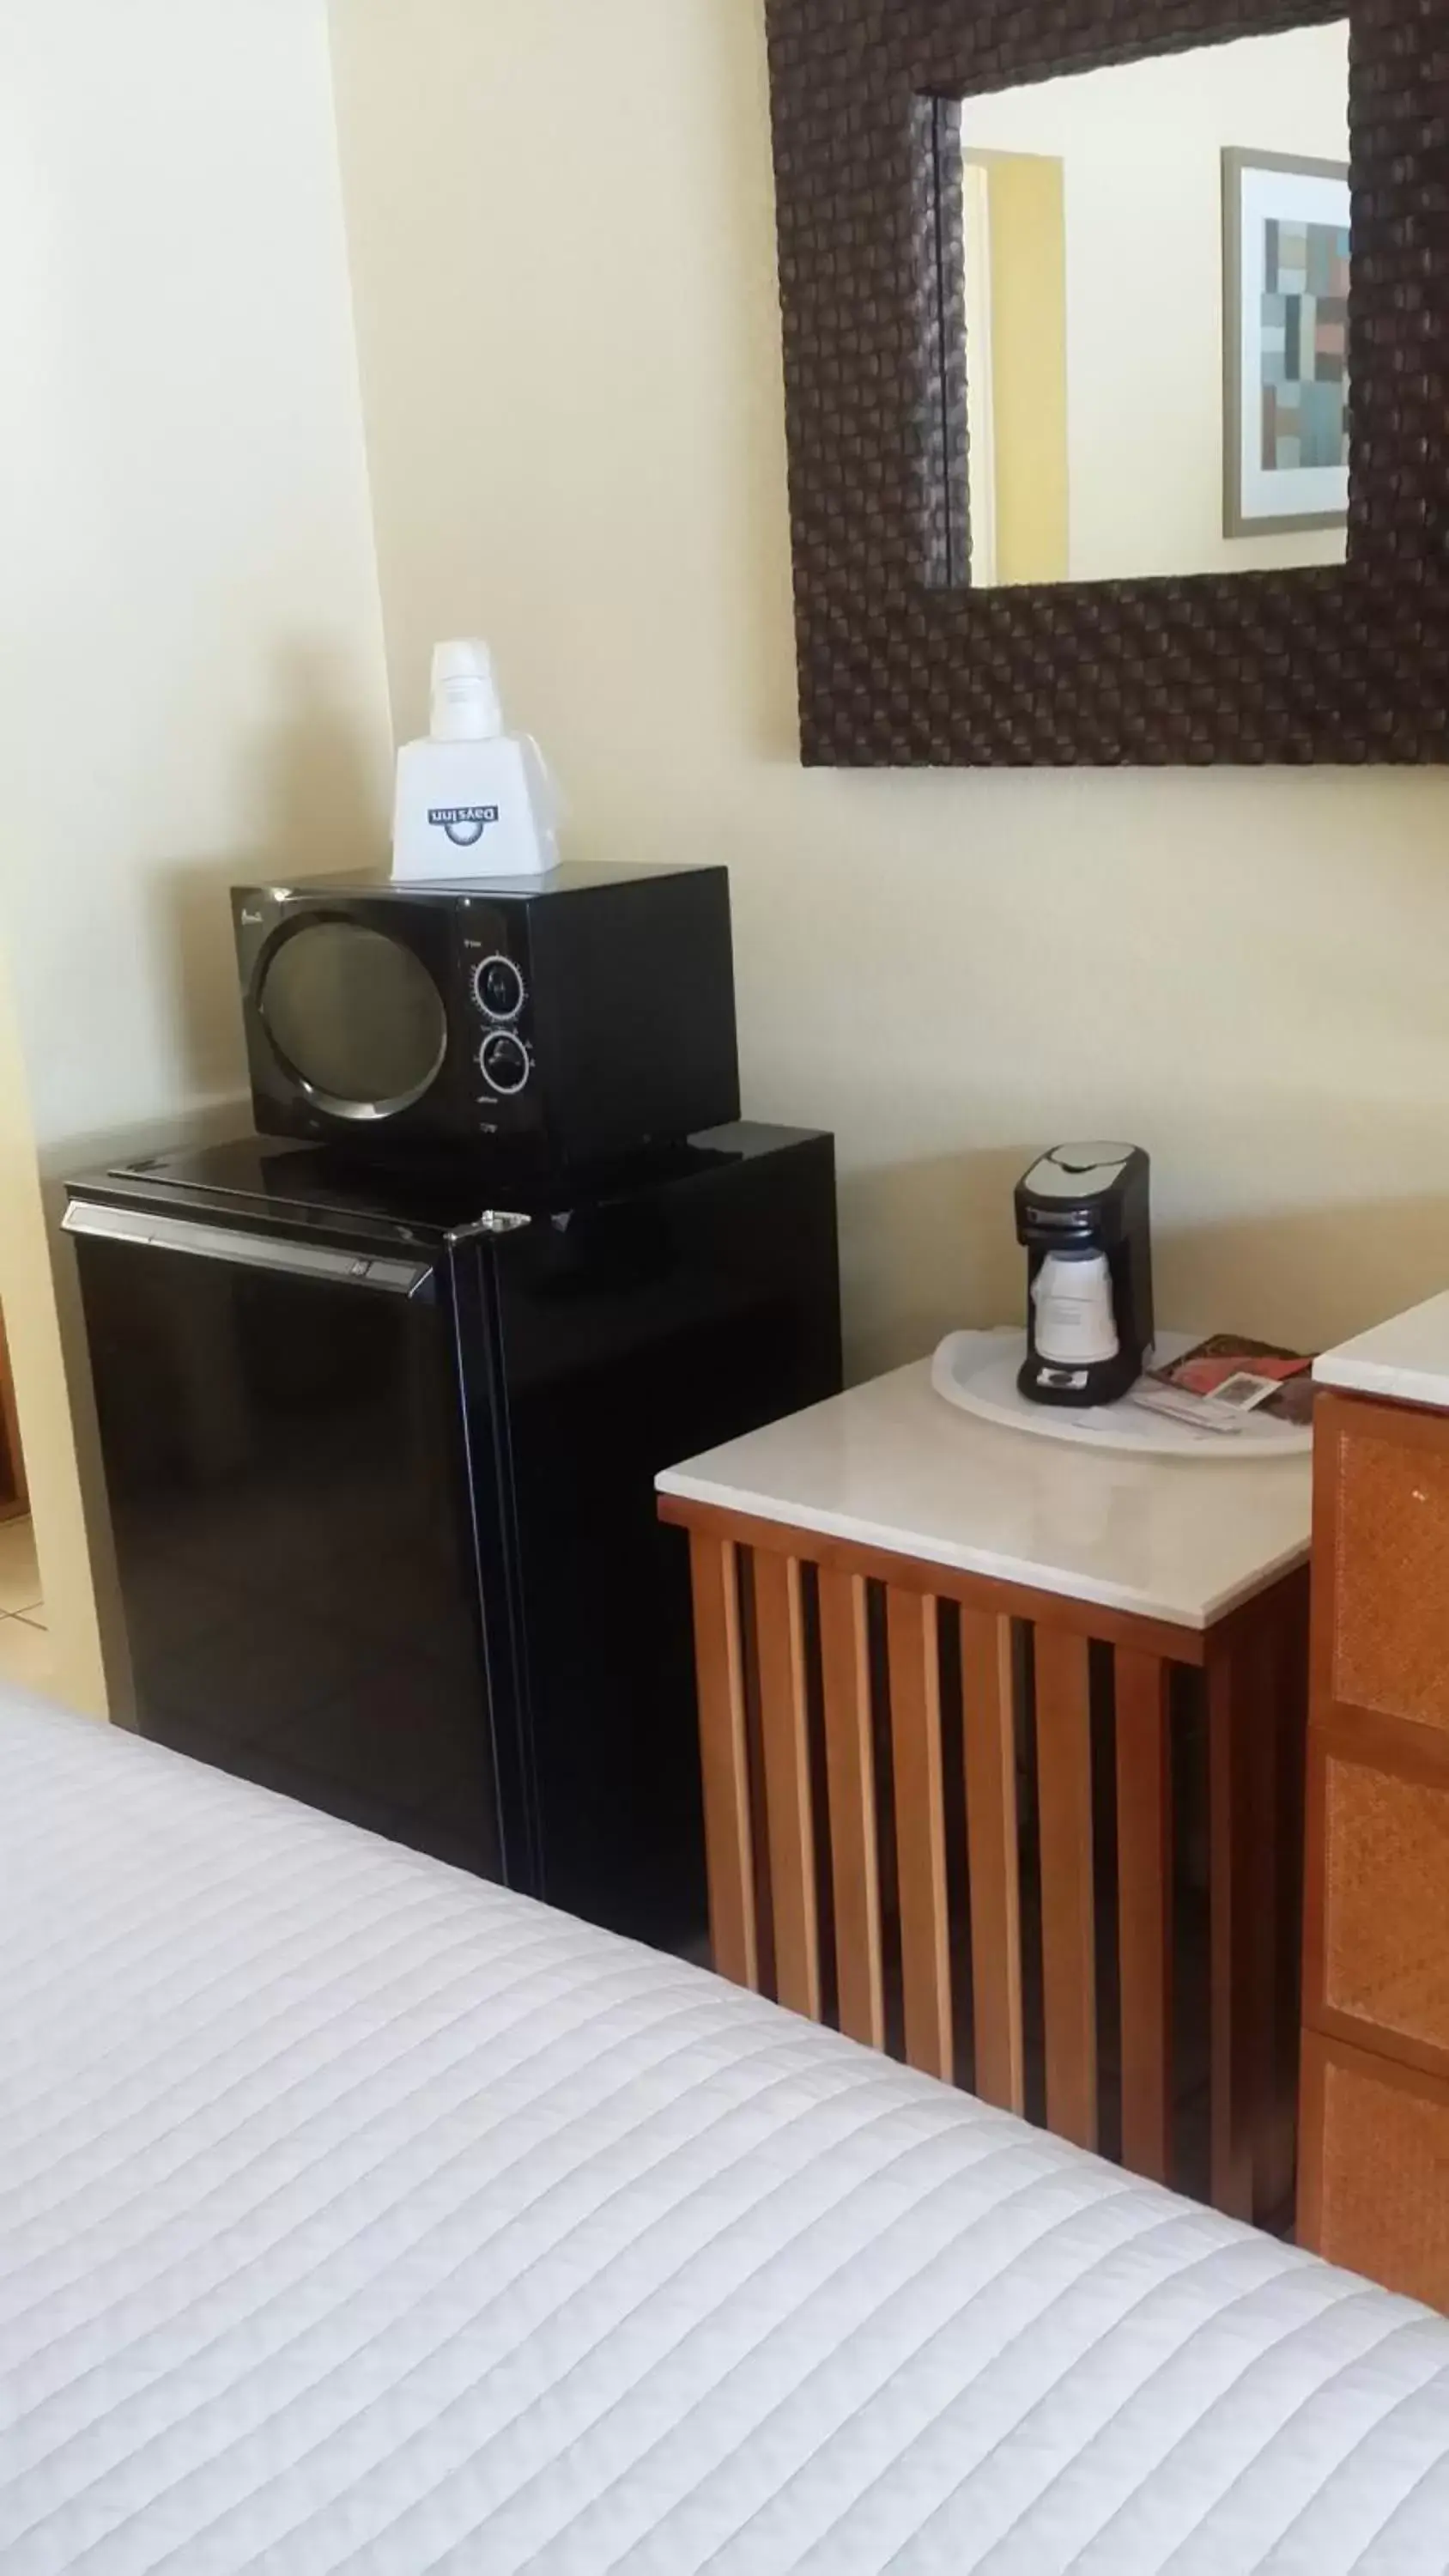 Bedroom, TV/Entertainment Center in Days Inn by Wyndham Cocoa Cruiseport West At I-95/524